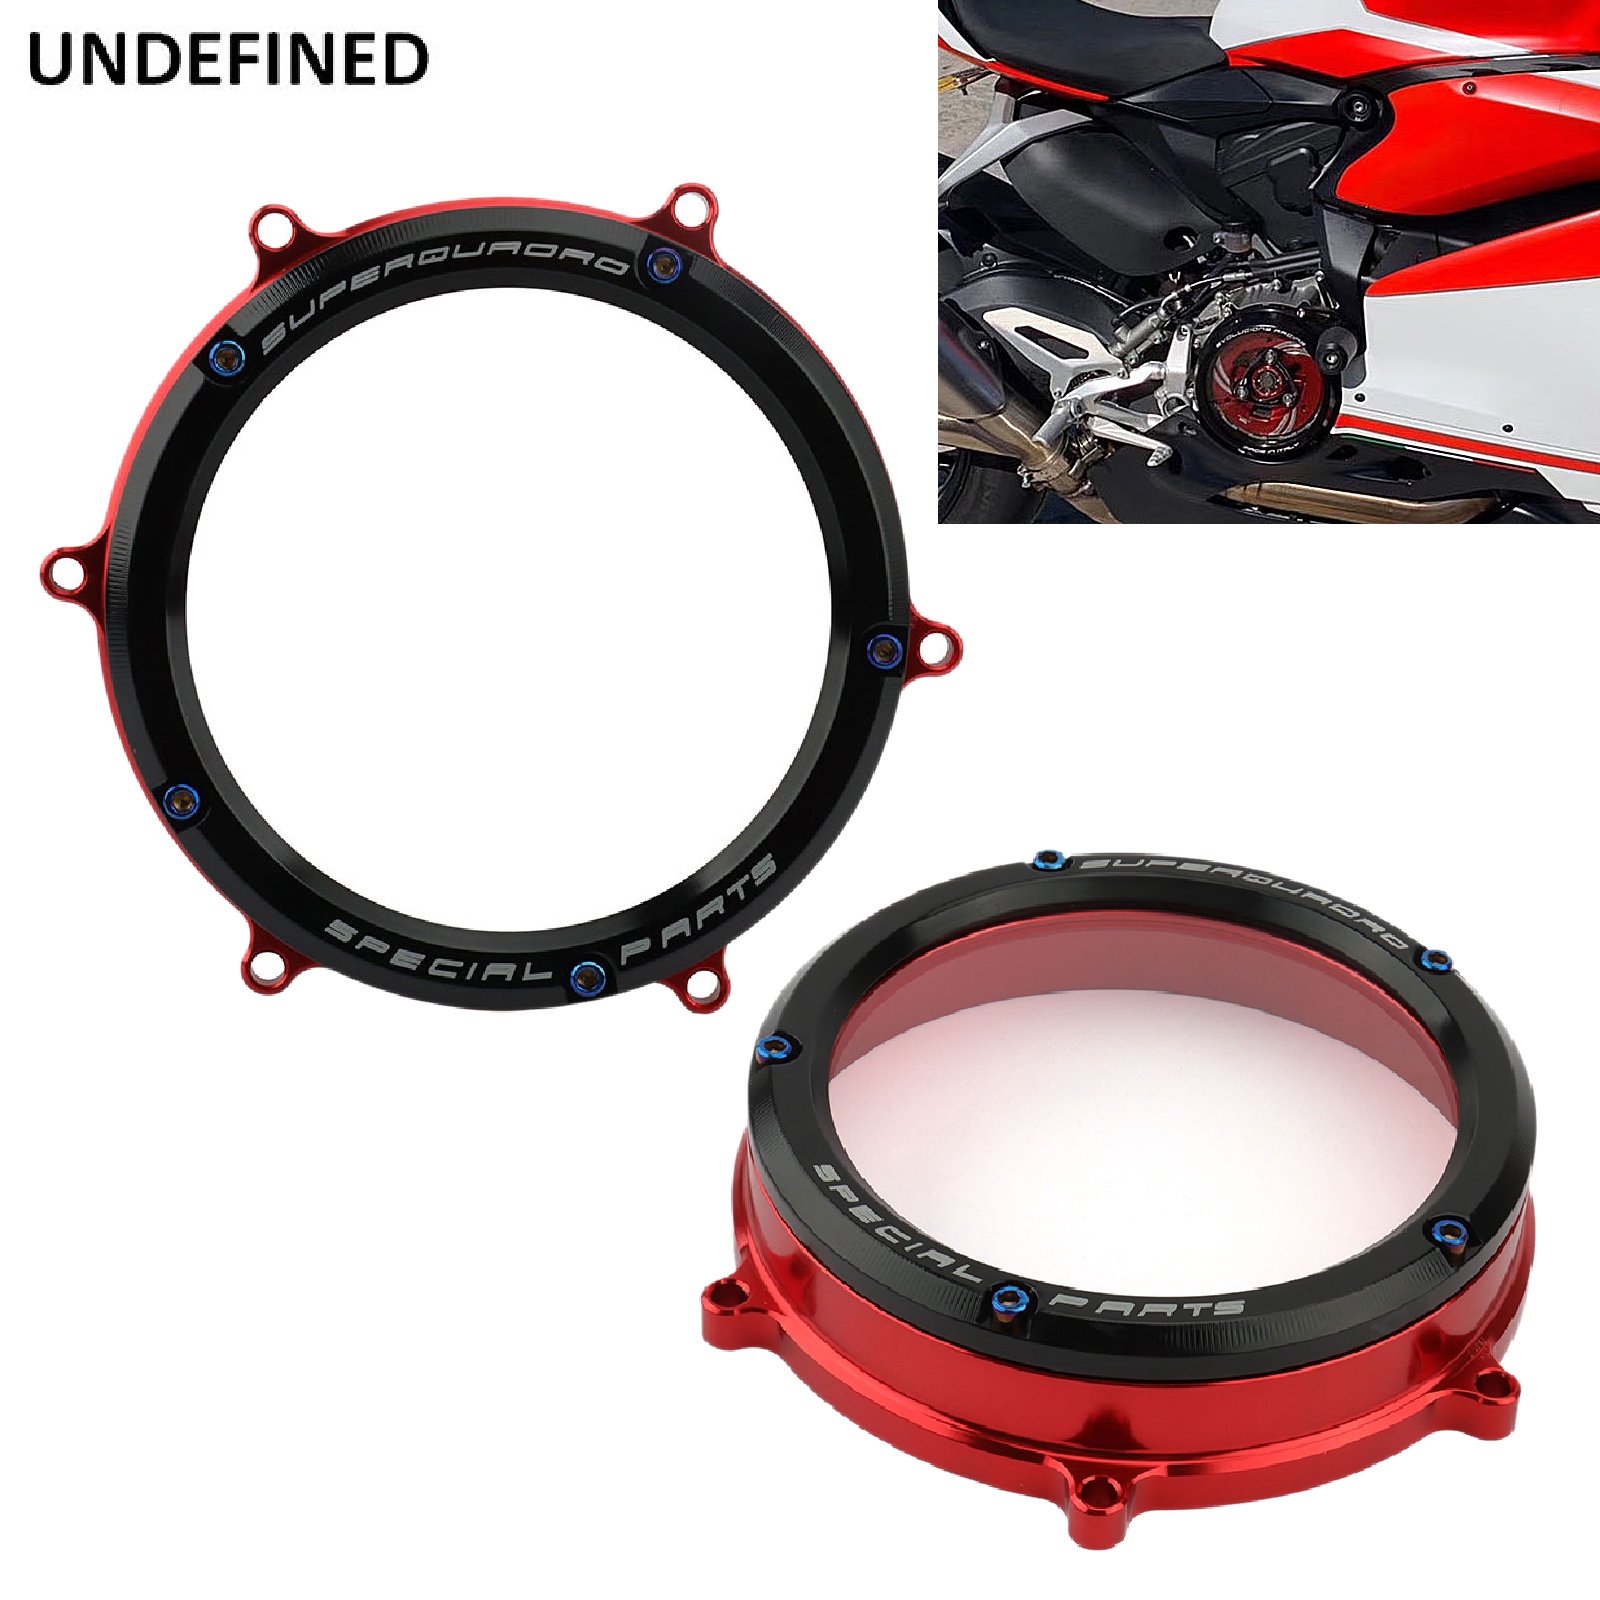 Racing Clear Clutch Cover Spring Retainer Fit Ducati Xdiavel